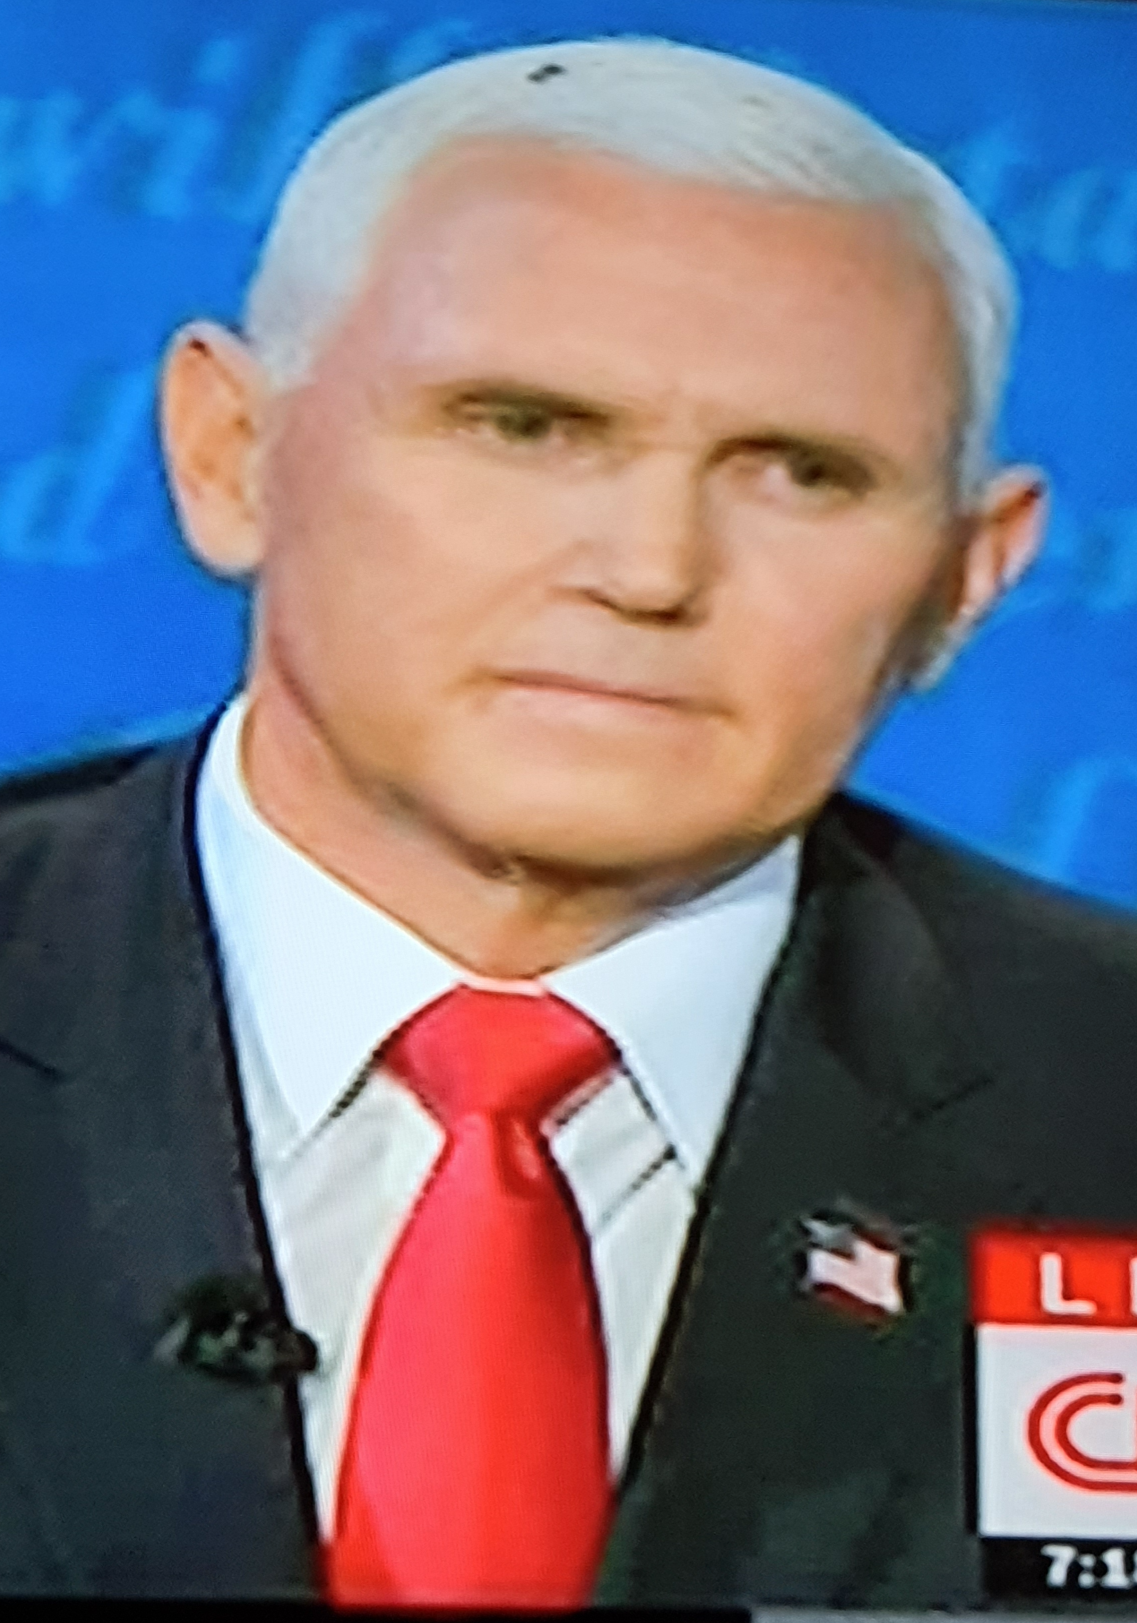 PENCE WITH FLY ON HEAD Blank Meme Template